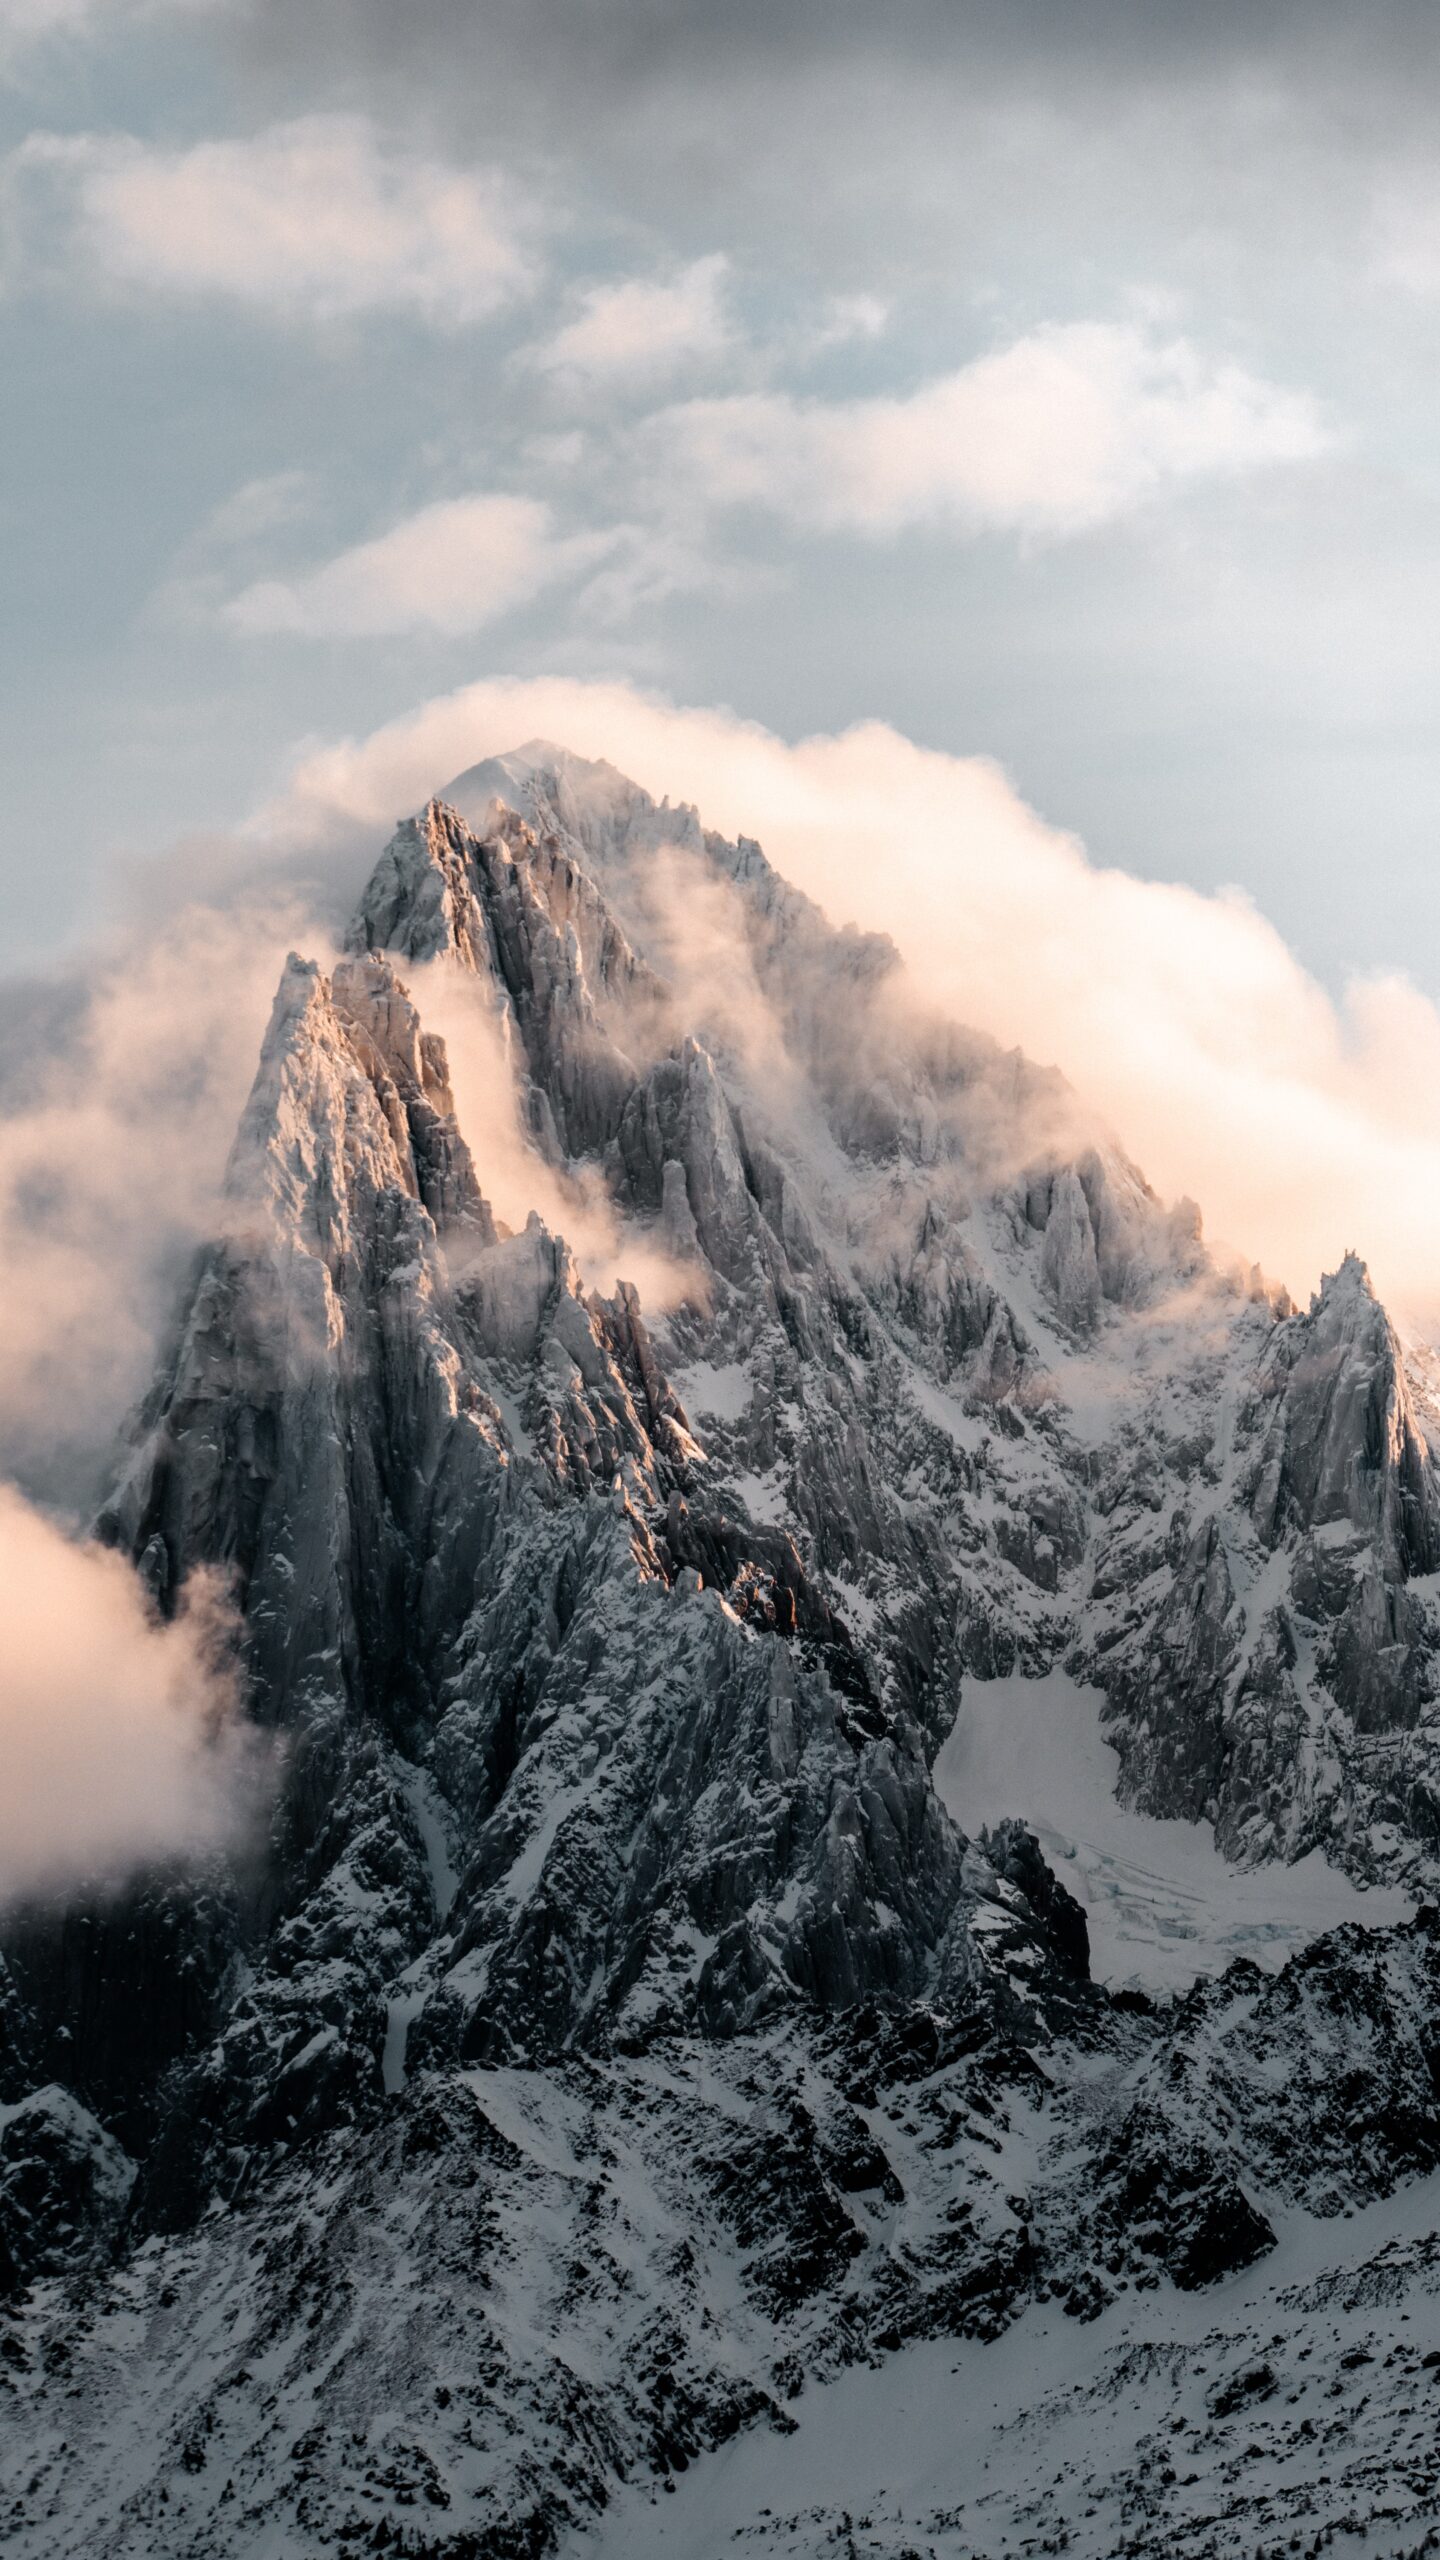 The best mountain wallpaper backgrounds for iPhone to download free